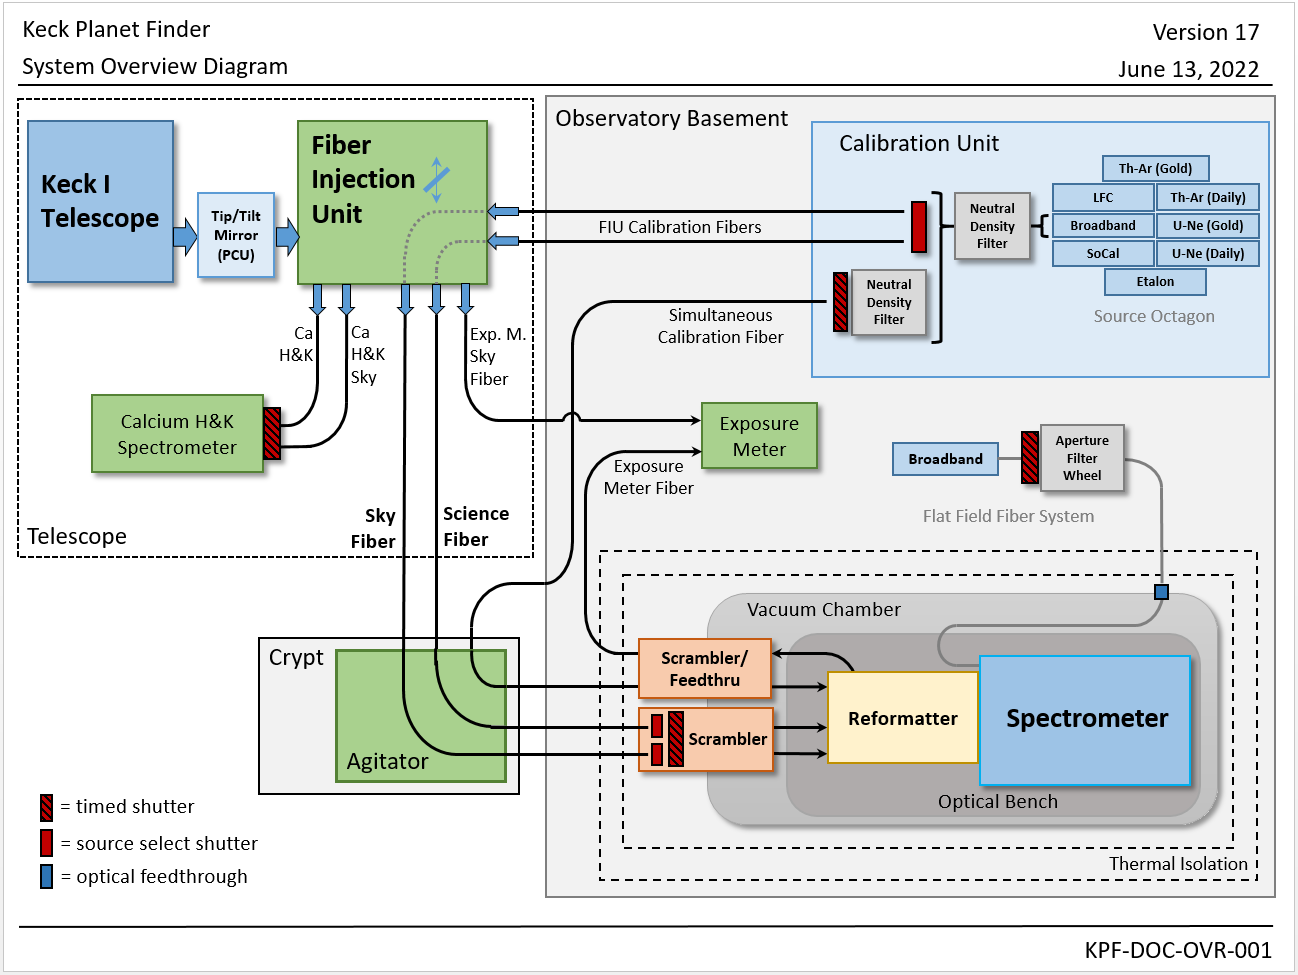 The system overview diagram showing the relationships between the different subsystems of the instrument.